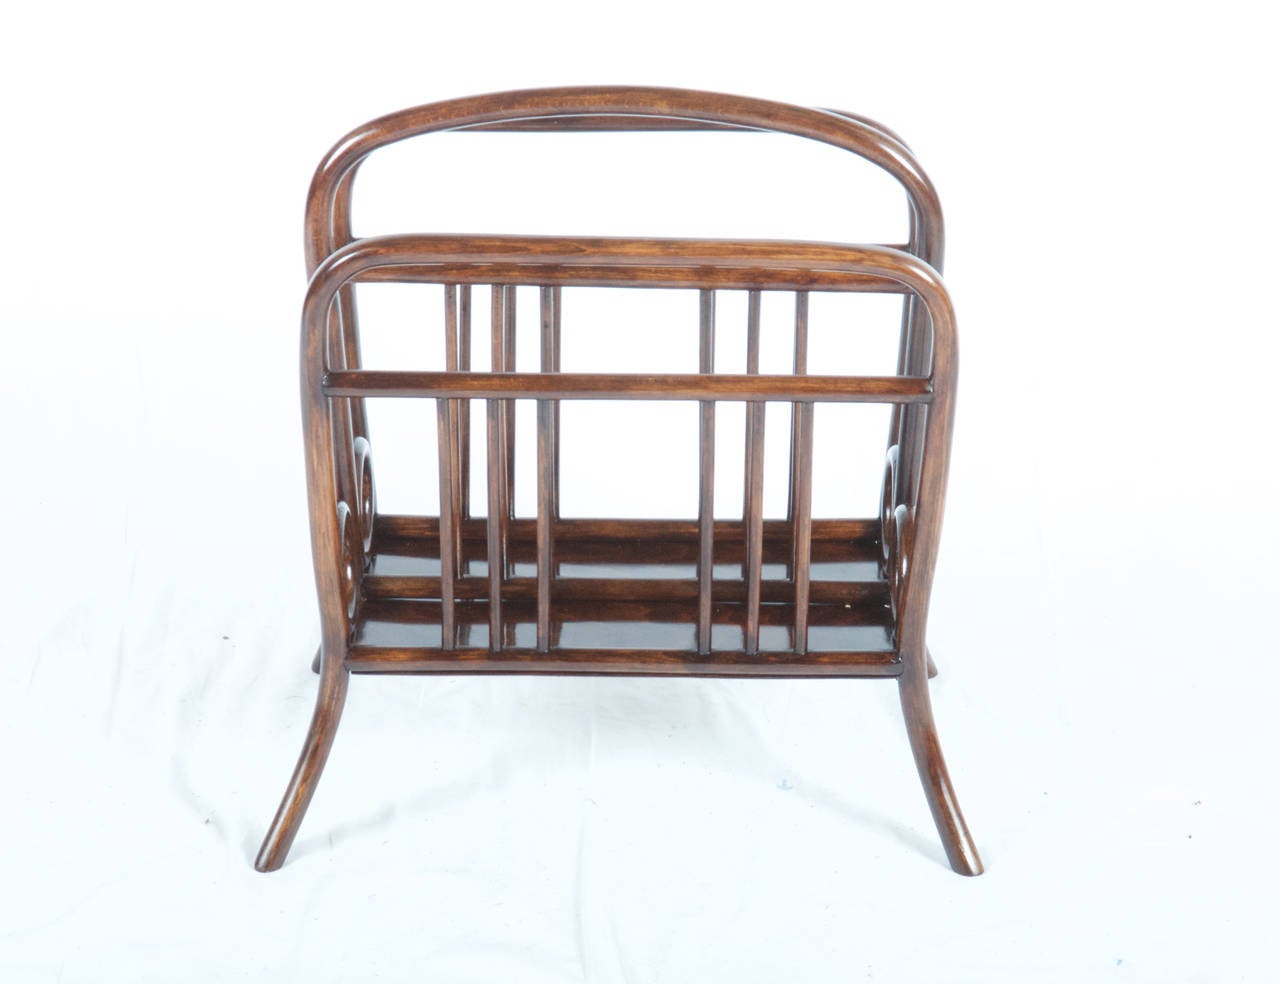 Open, four-footed stand, center vertically divided into two parts, subdivision highly performed as loop handle, side panels with dainty rung of round rods. 

Dimentiones: H. 54 cm; 47.5 x 27 cm. Model no. 11834th 
Beech, bentwood of squared